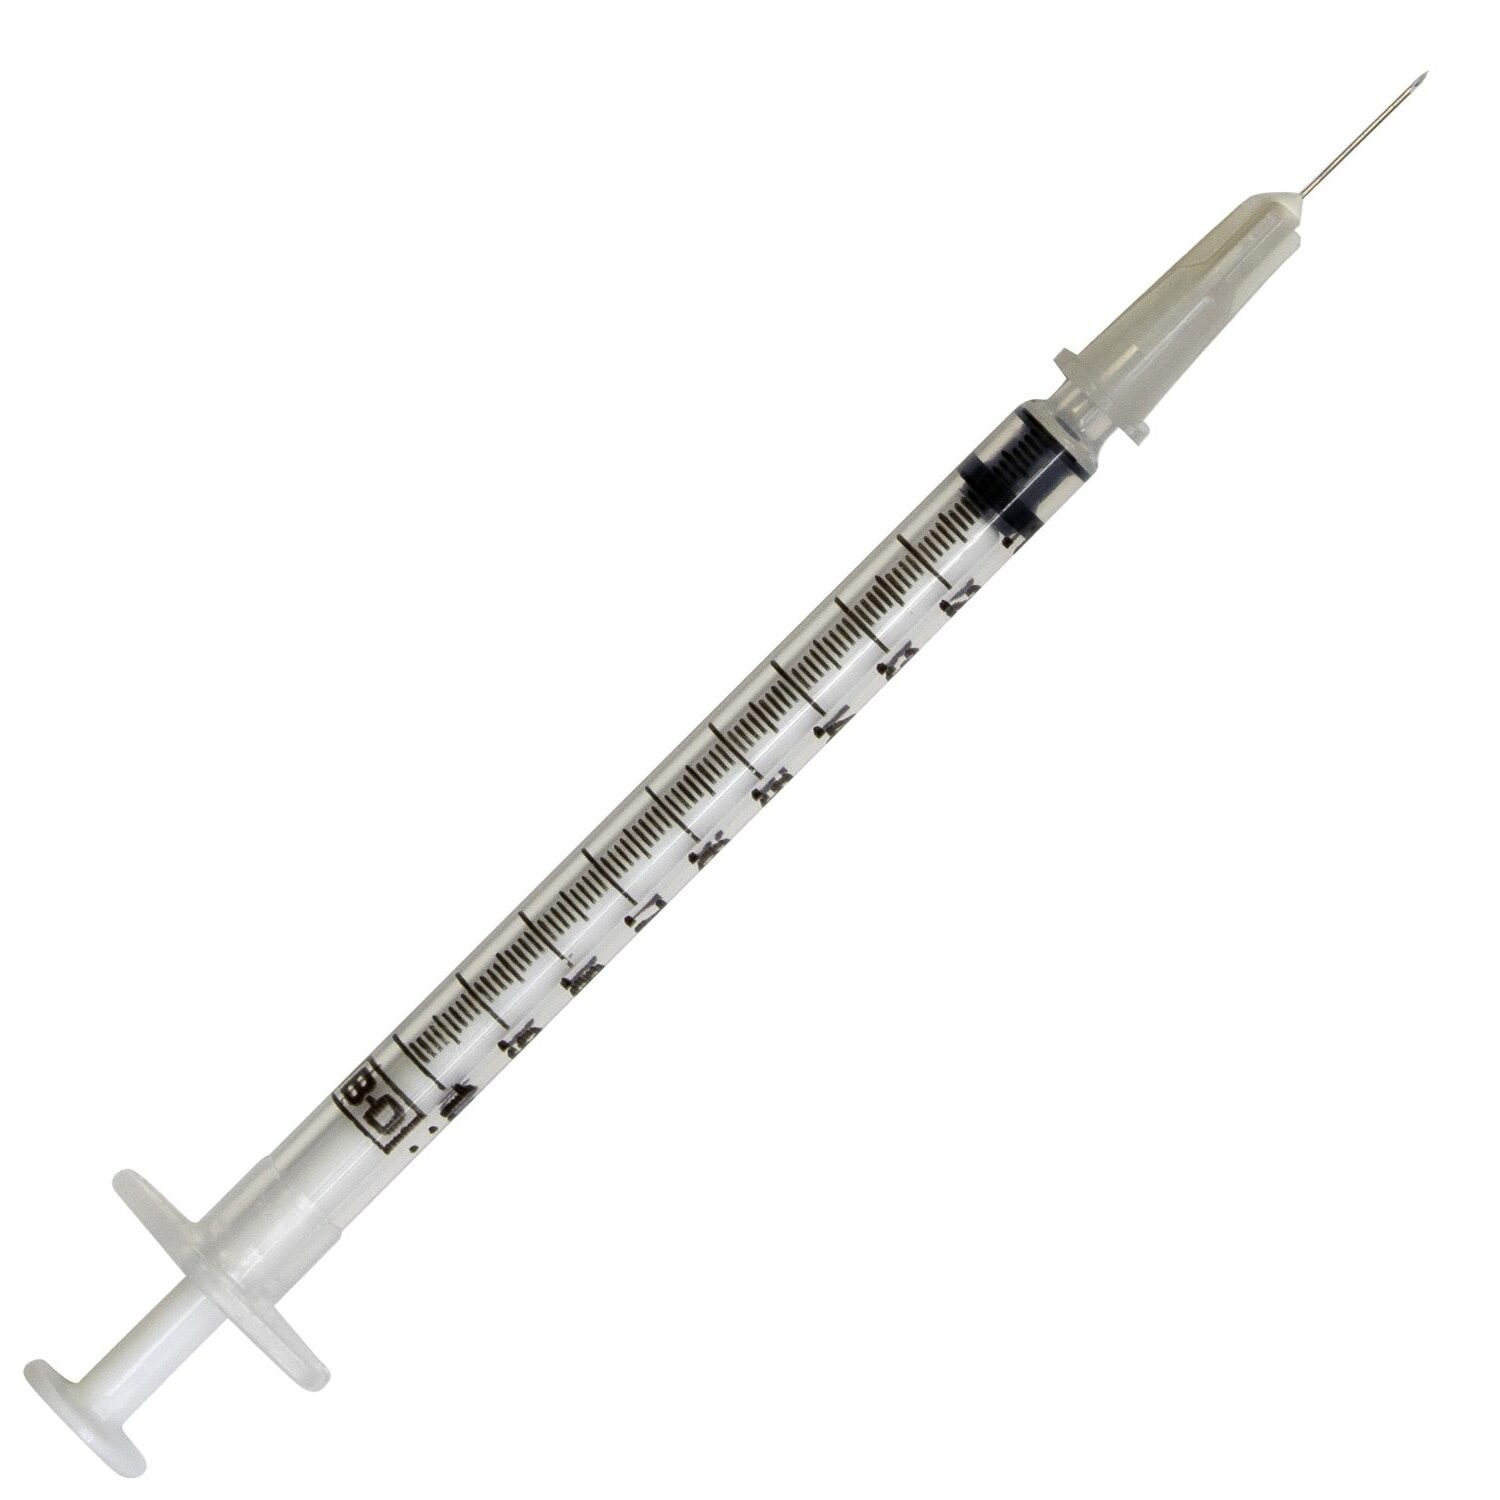 BD 1mL TB Syringe Slip Tip with Detachable Precisionglide Needle